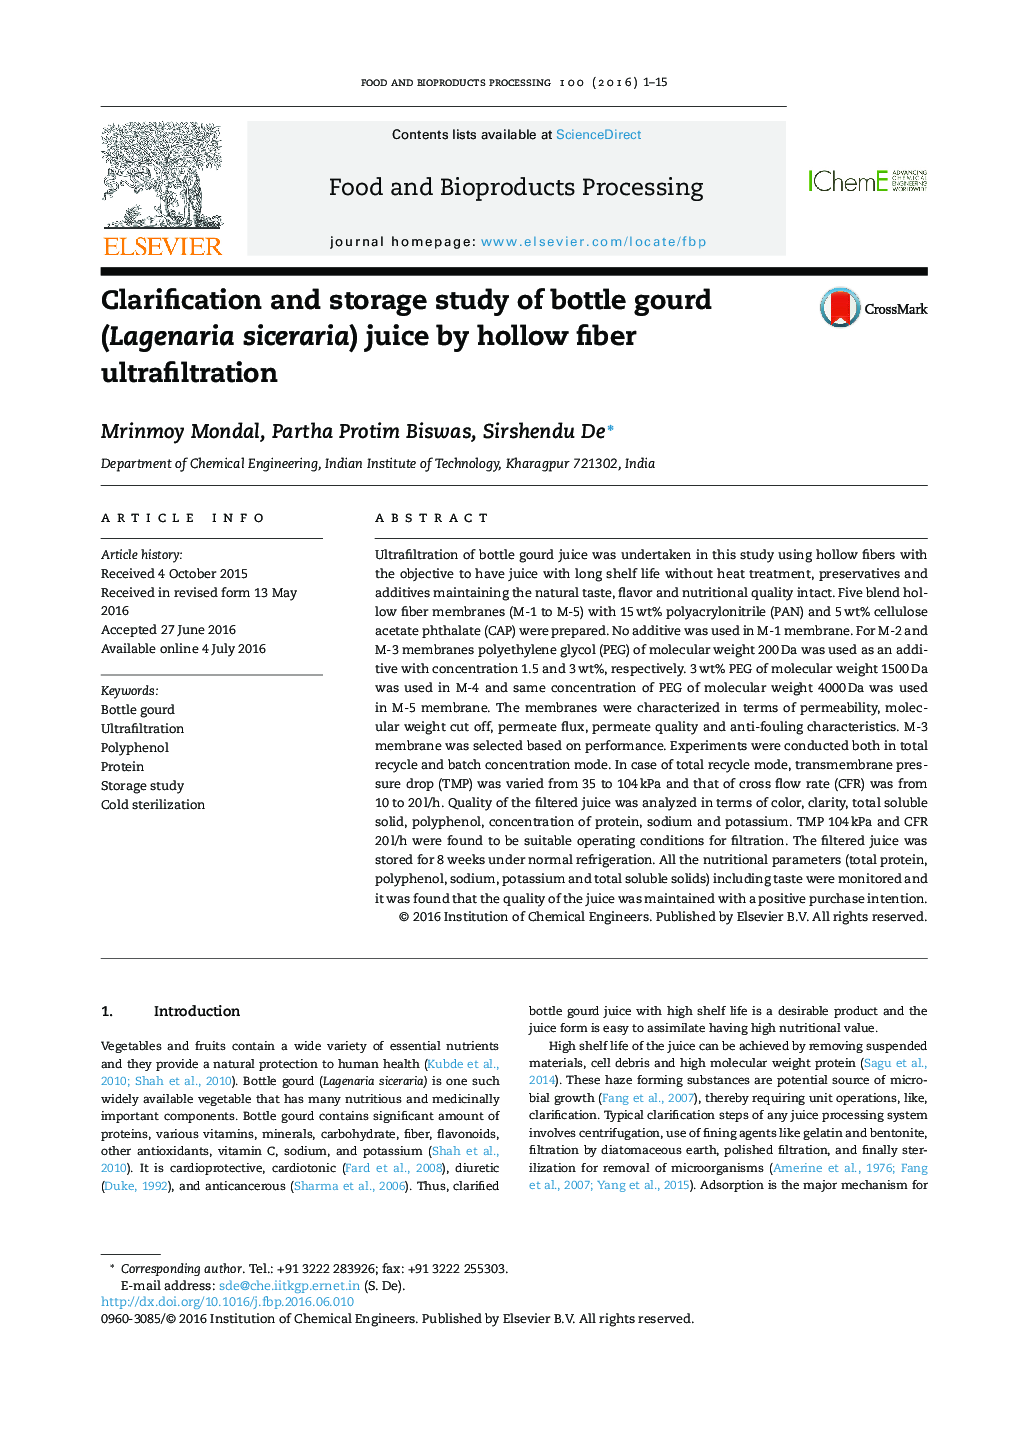 Clarification and storage study of bottle gourd (Lagenaria siceraria) juice by hollow fiber ultrafiltration